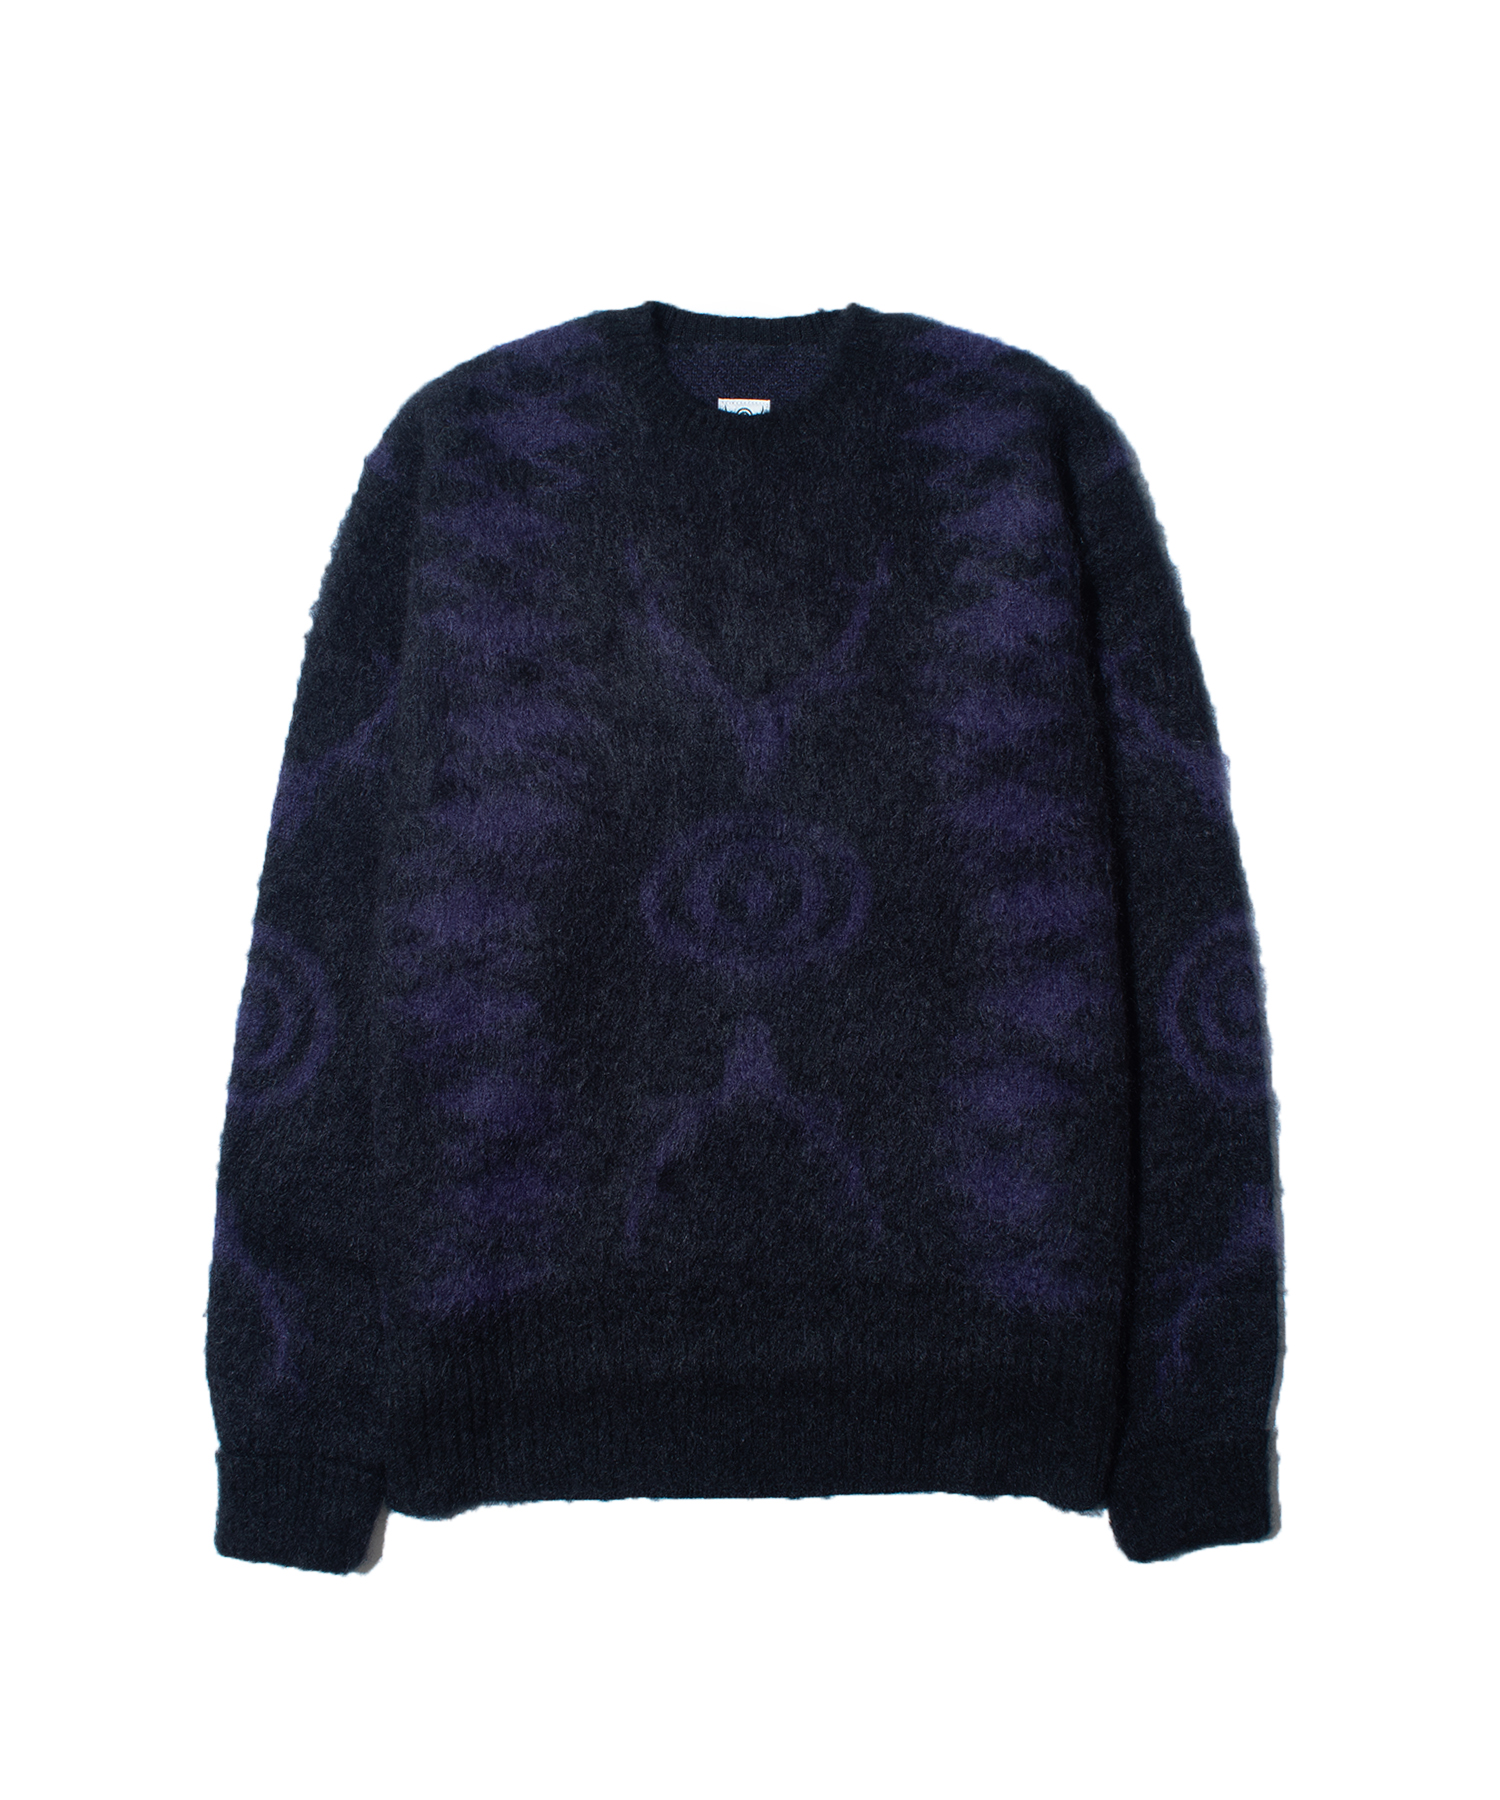 South2 West8 Loose Fit Sweater-S2W8 Native / サウスツーウエスト